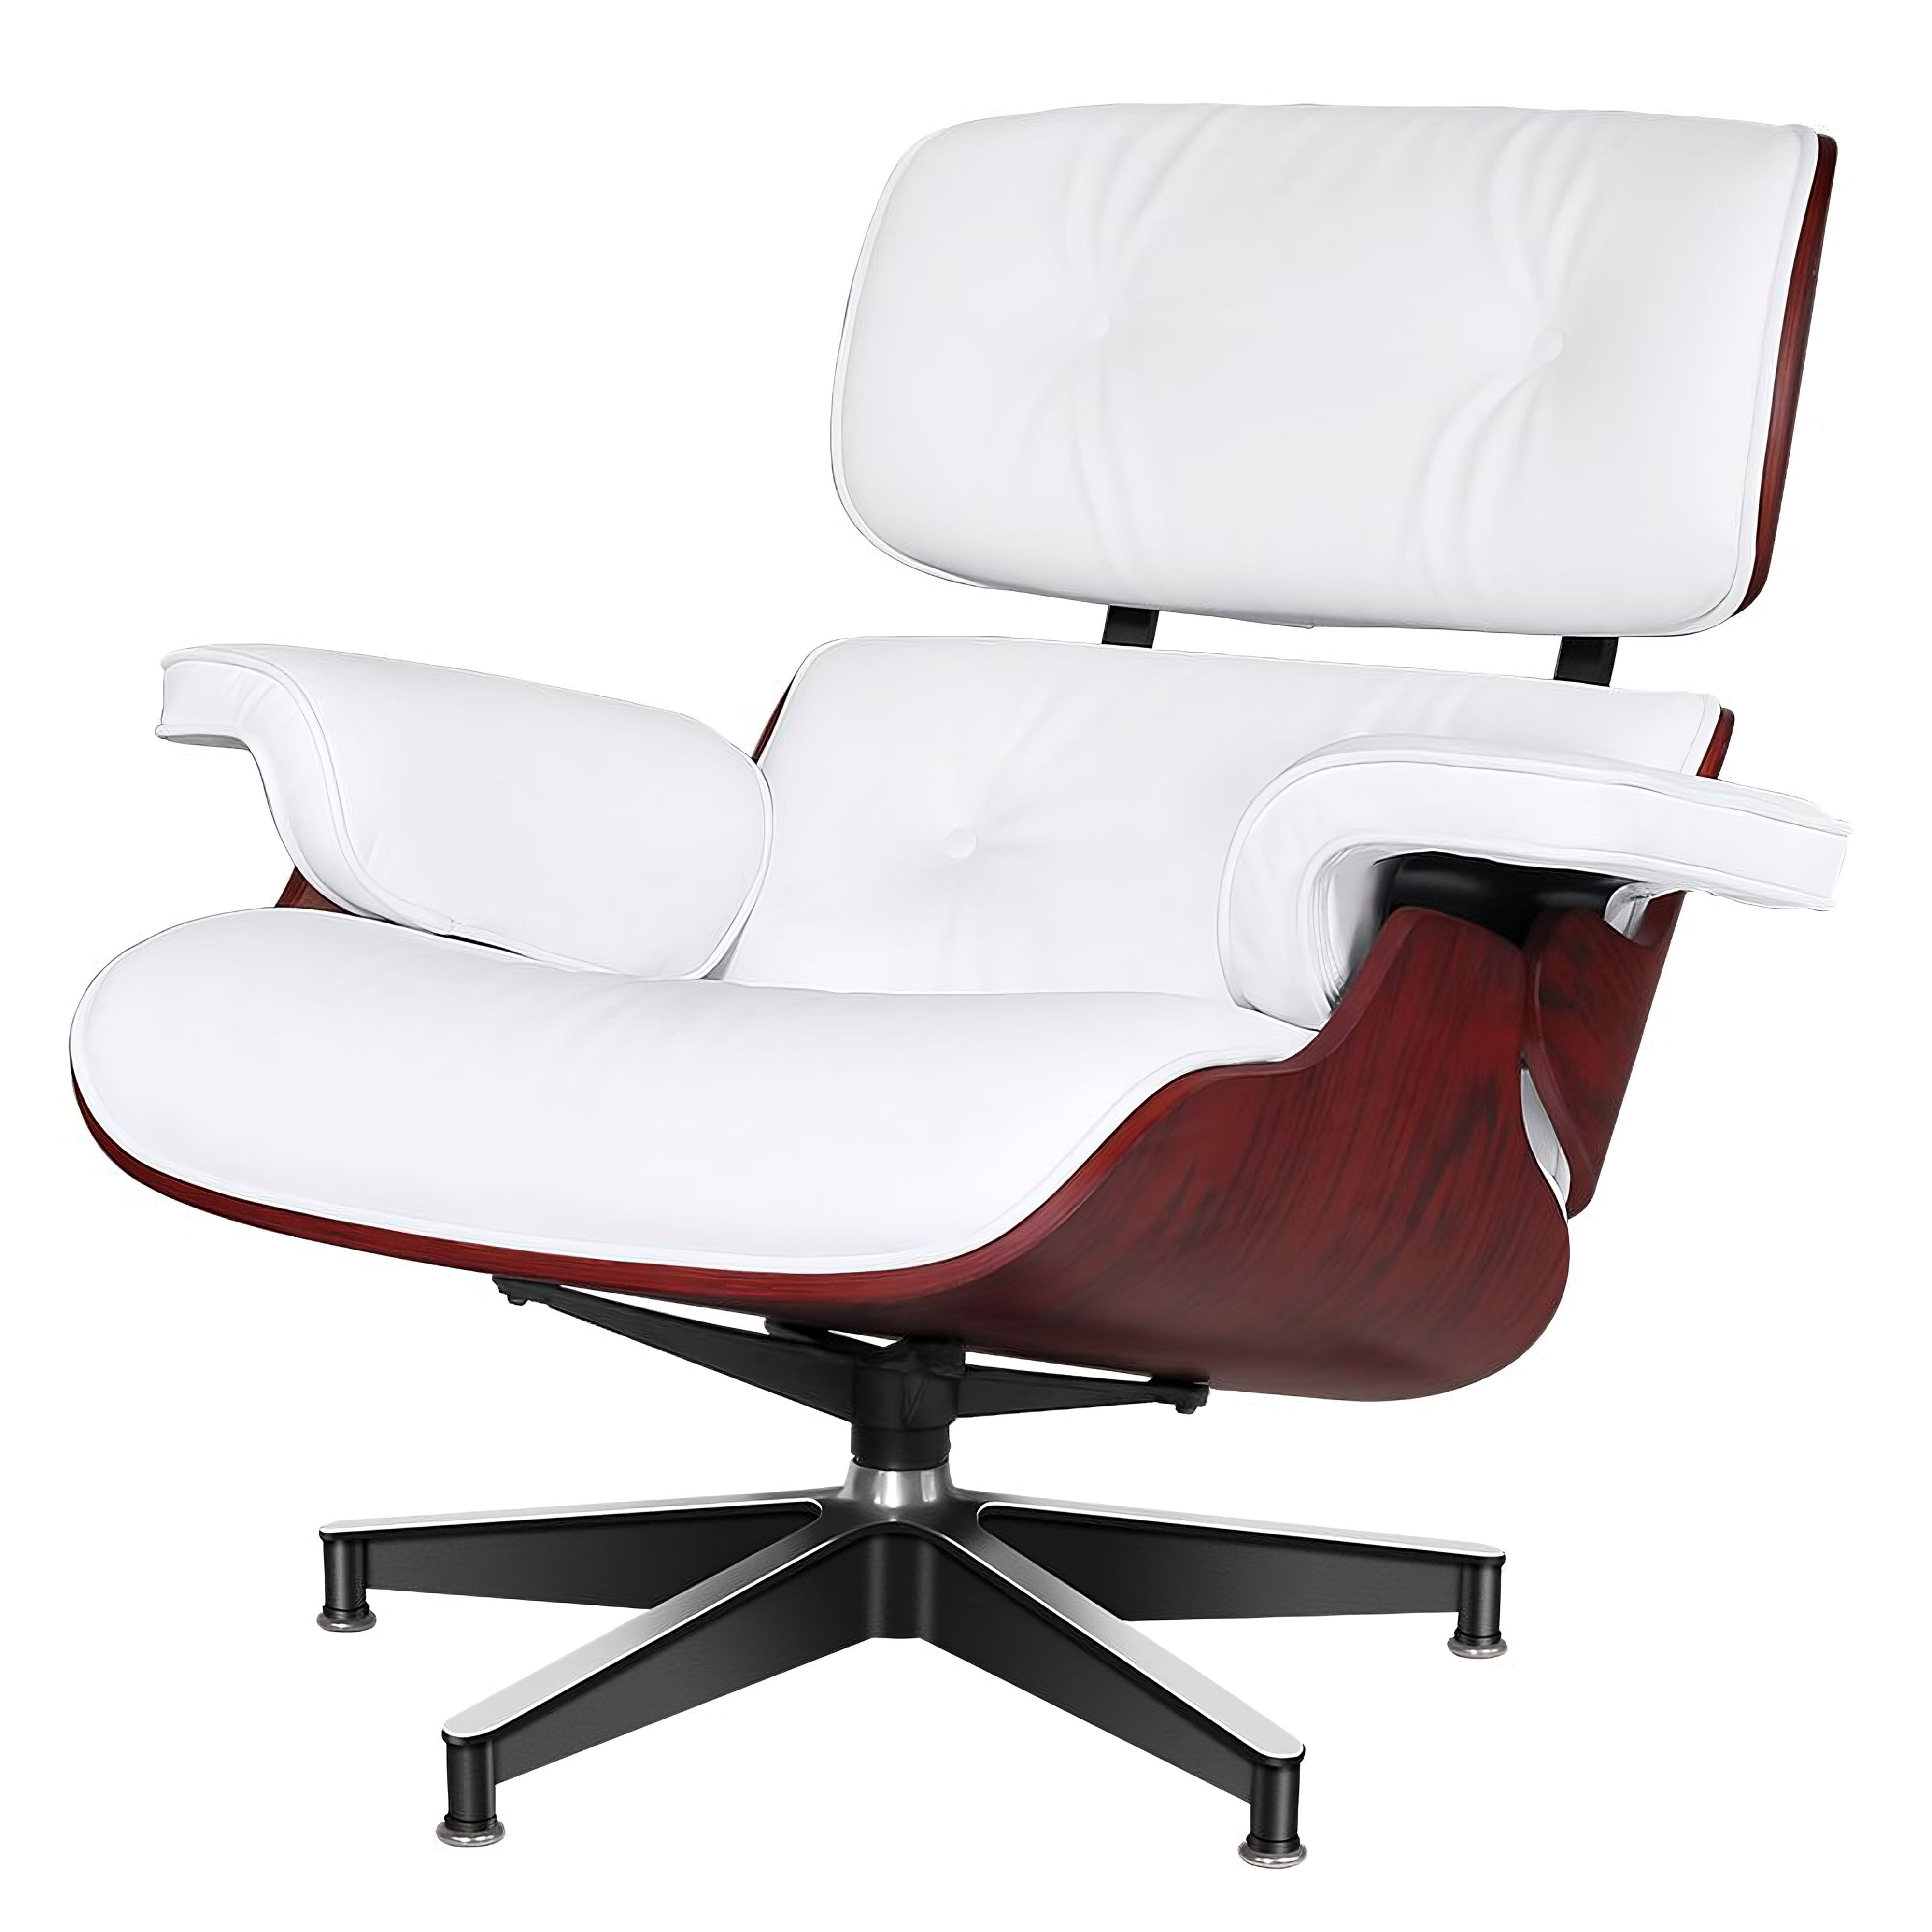 Charles and Ray Eames Lounge Chair, Full-Grain Leather, Aluminium, and Veneer